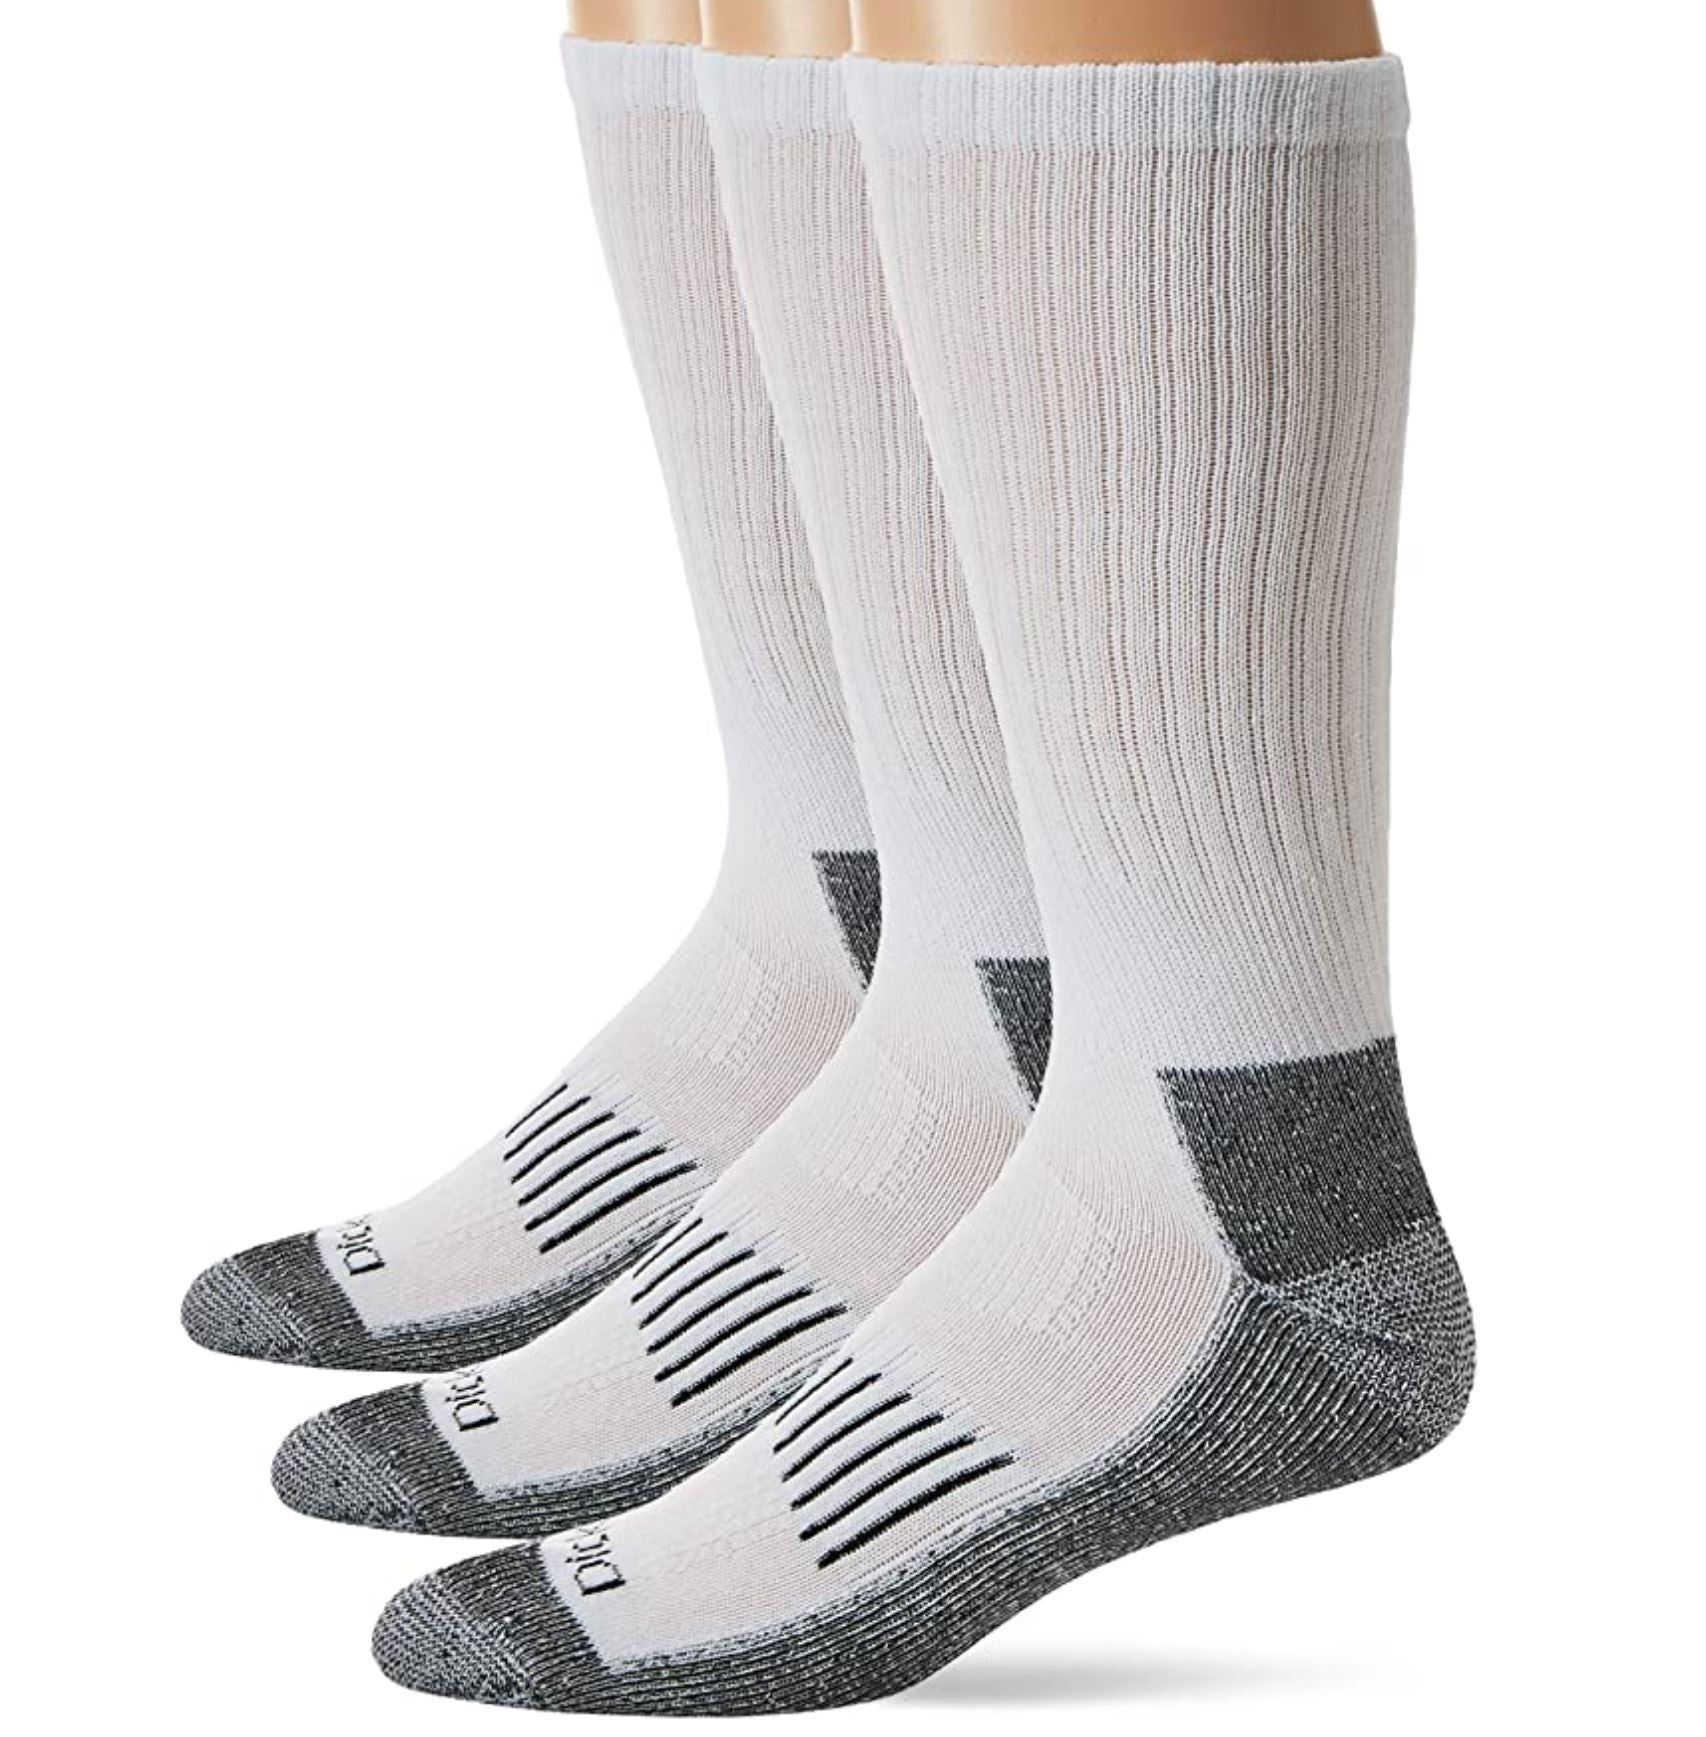 The best work socks for farming & other rough jobs | AGDAILY